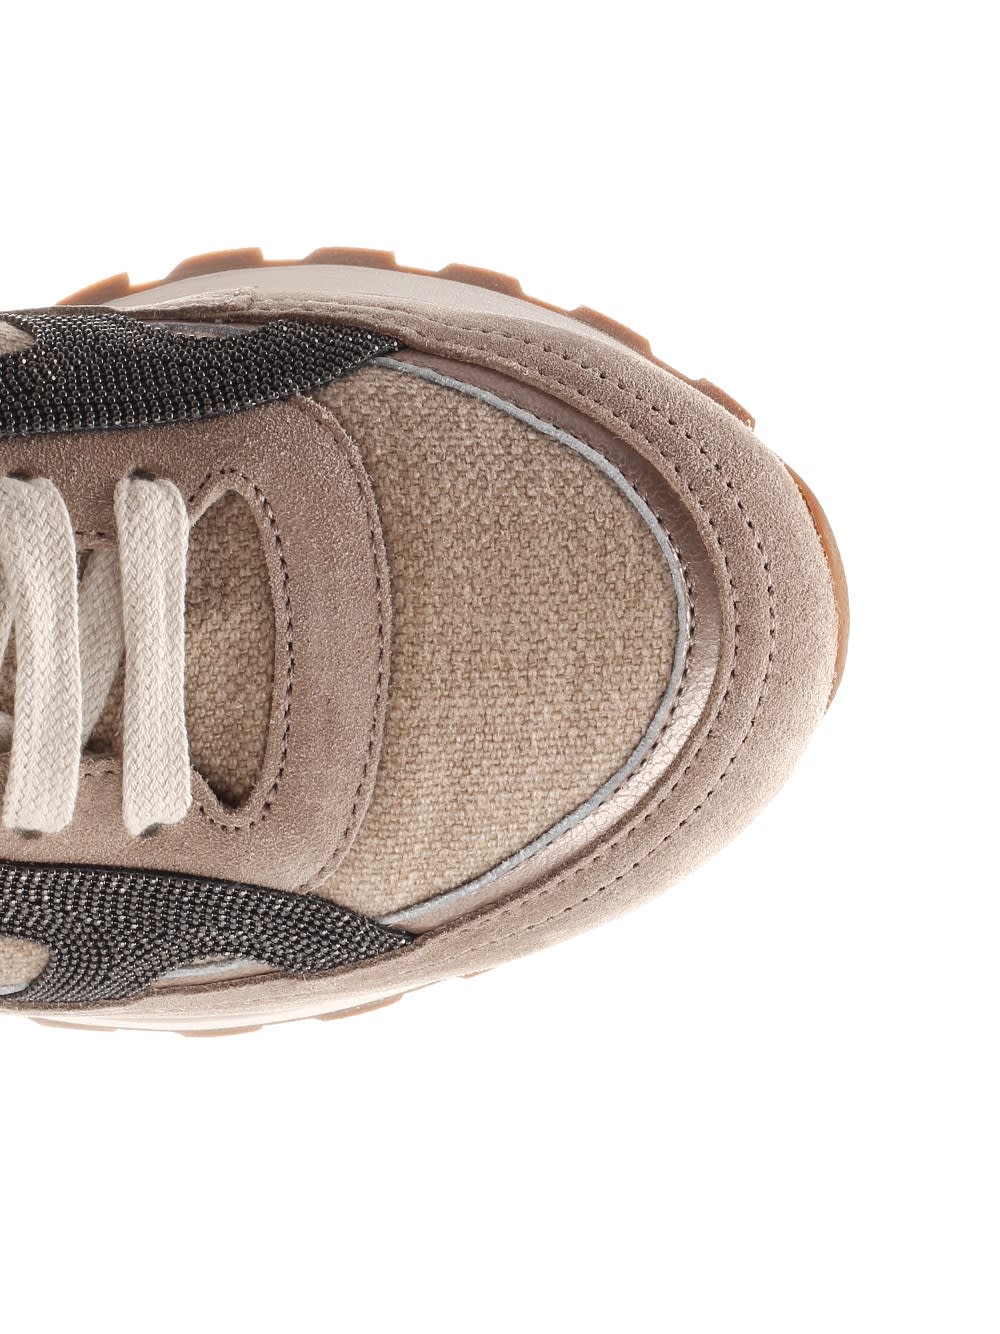 Shop Brunello Cucinelli Suede And Canvas Sneakers In Light Brown